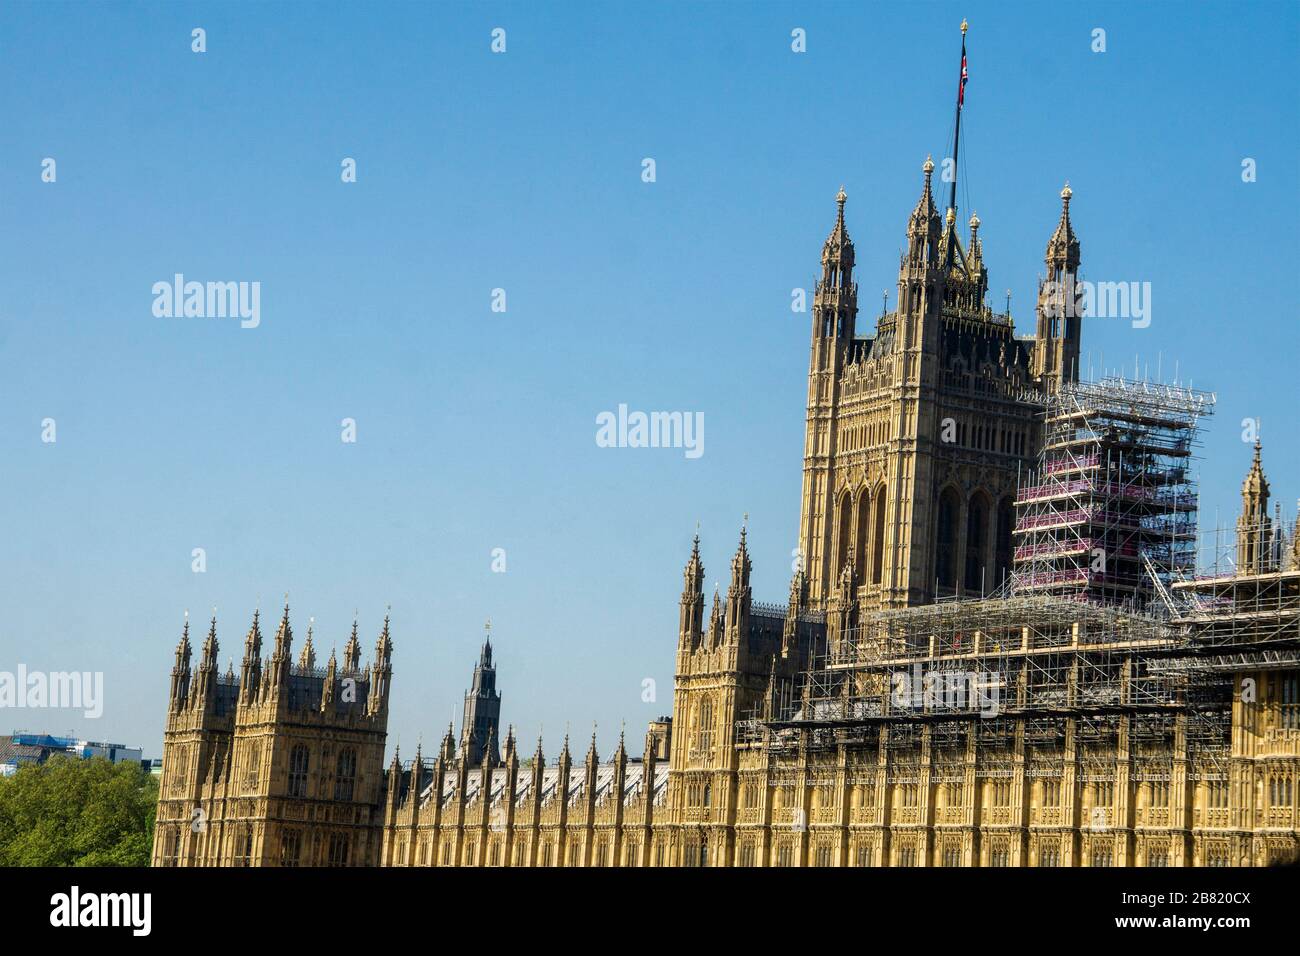 House of Parliment in London, England Stock Photo